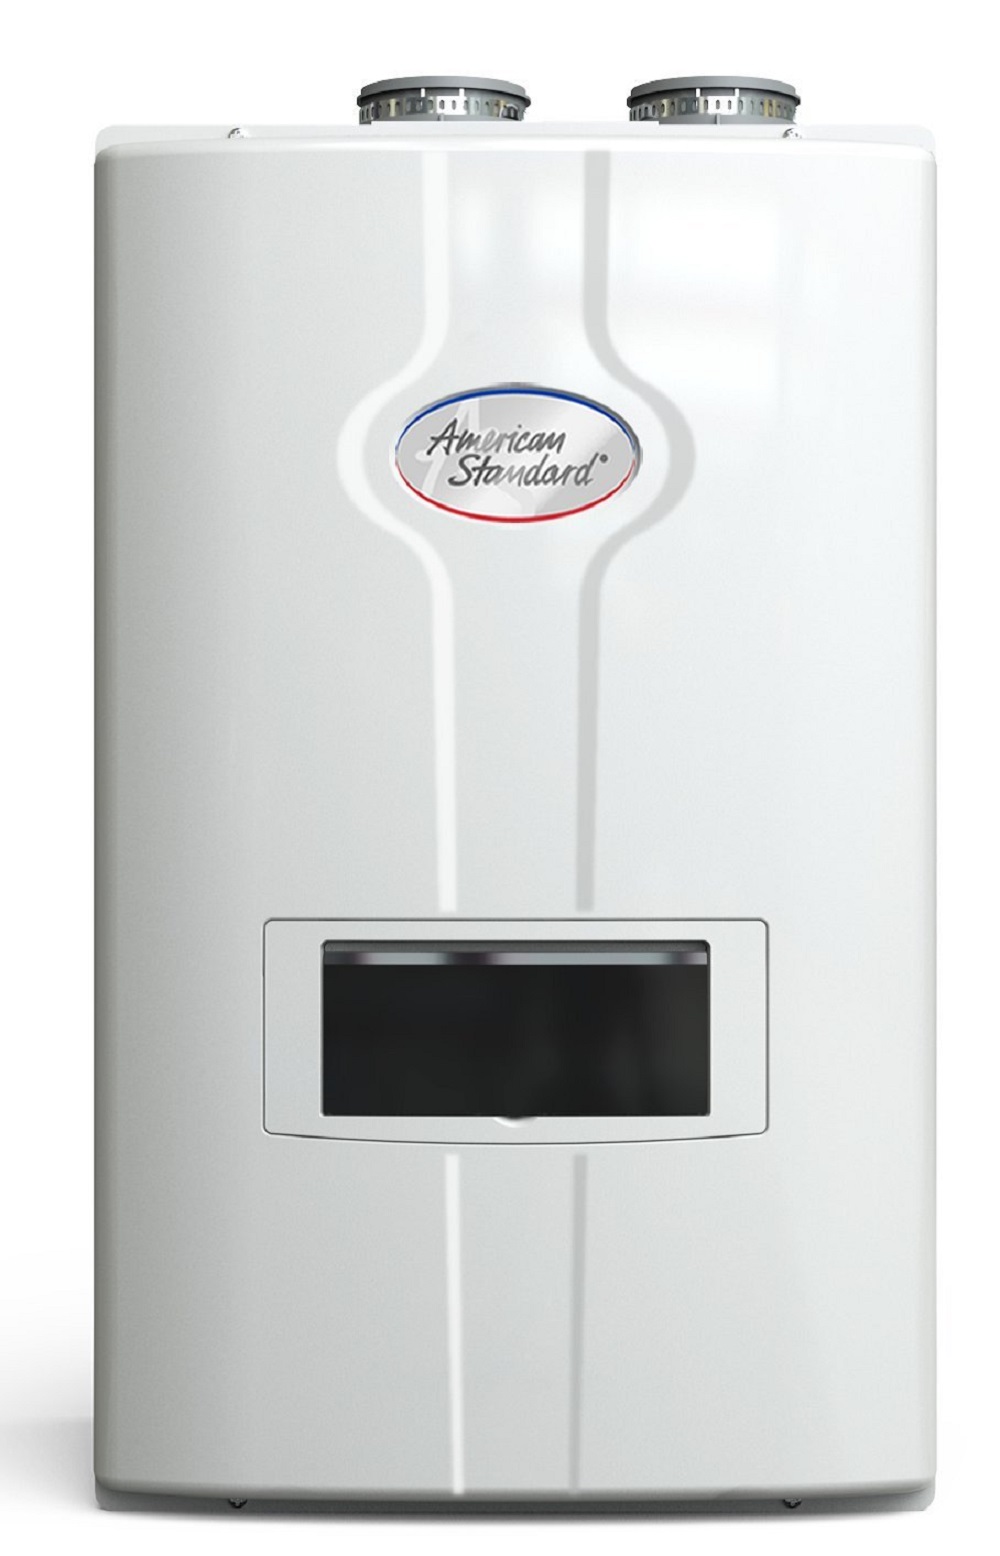 h7-2 The types of water heaters you can get for your home